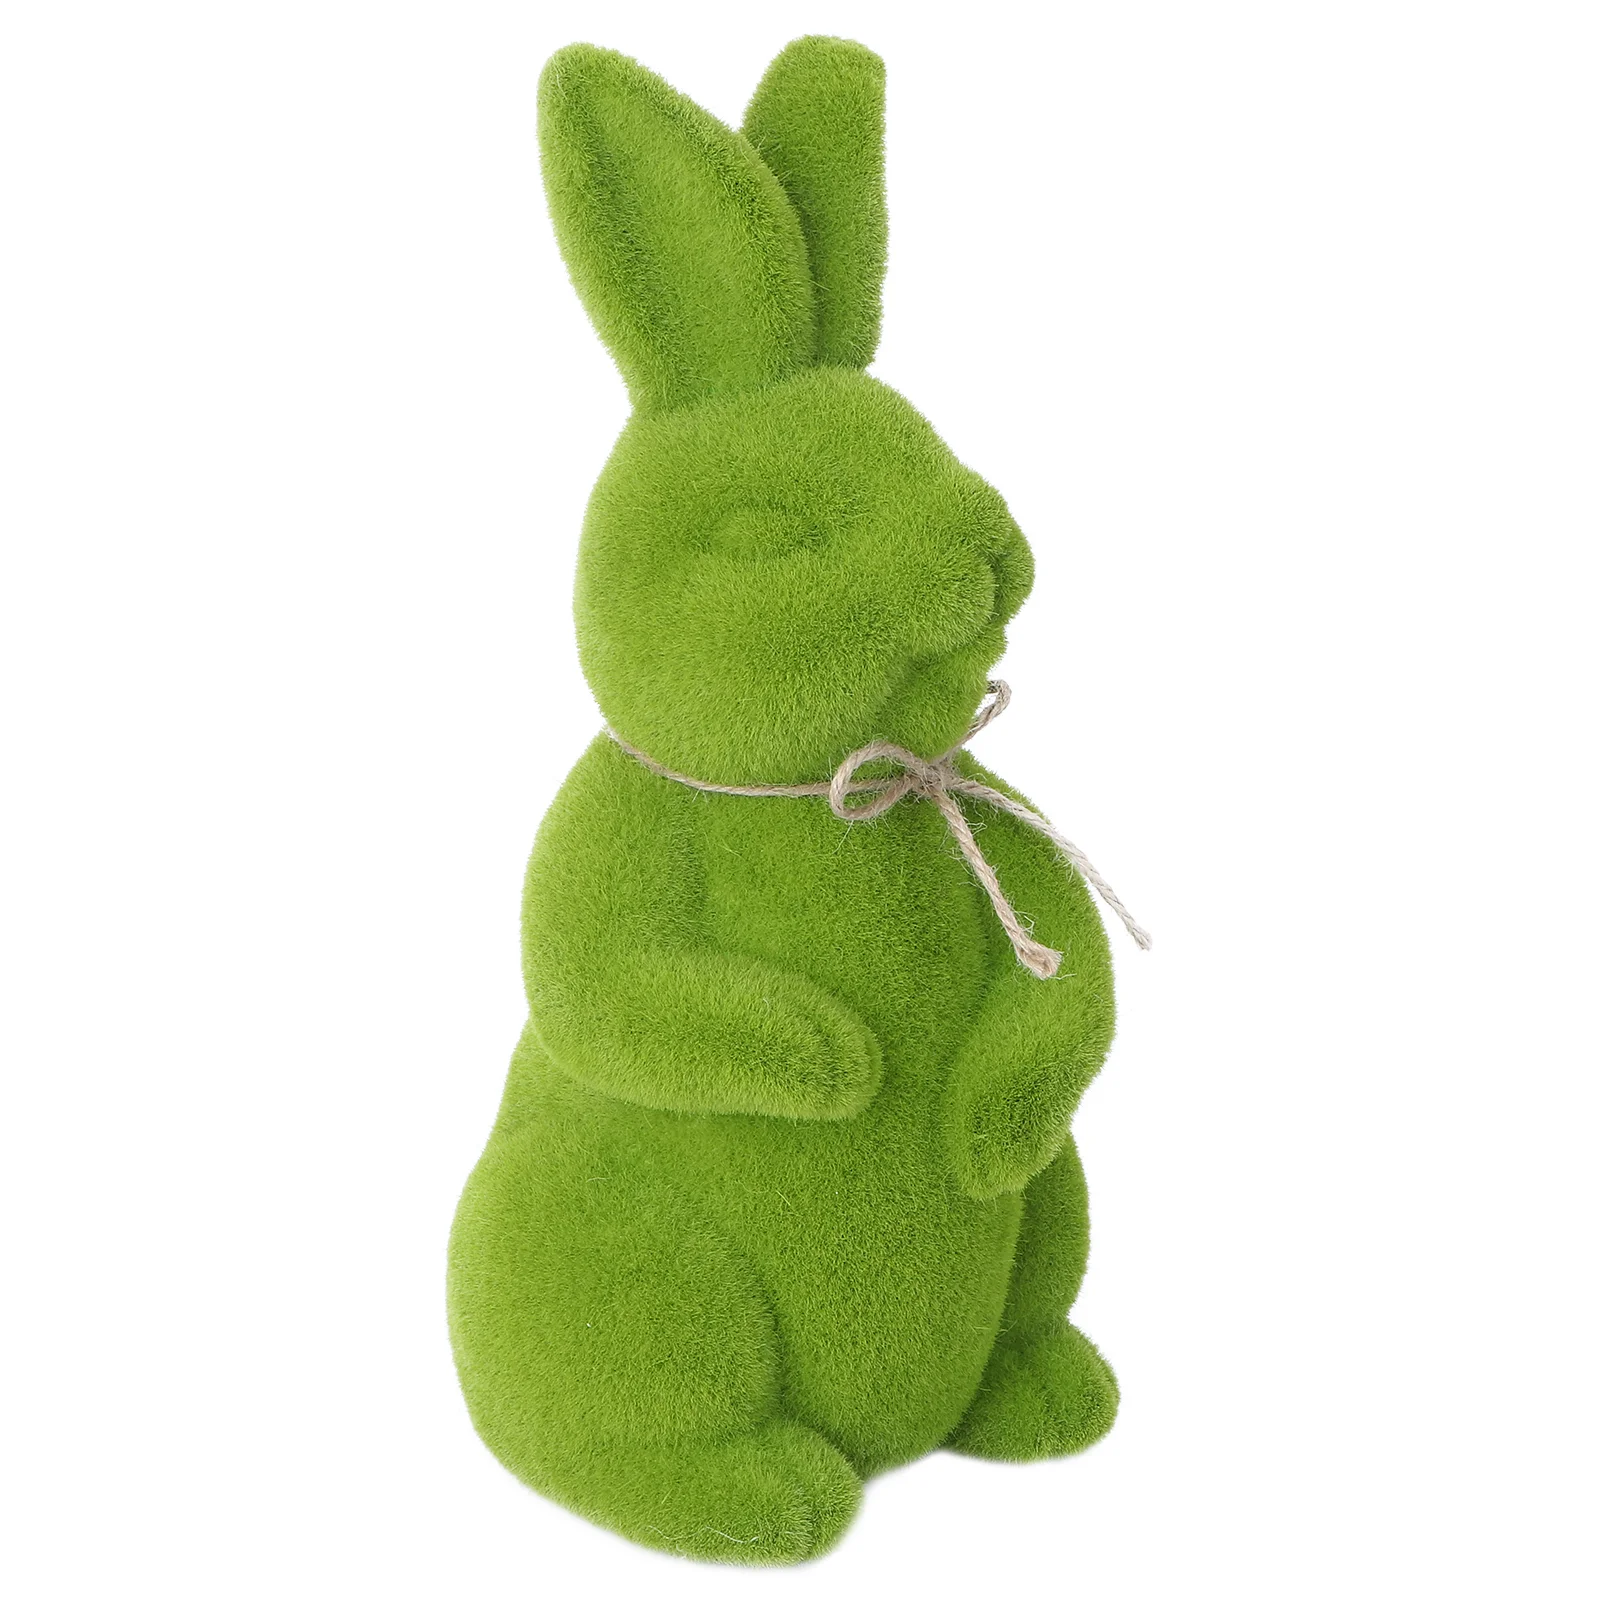 

Rabbit Easter Statue Bunny Decor Flocked Animal Figurines Lawn Adornment Garden Statues Decoration Outdoor Figur Easter bunny